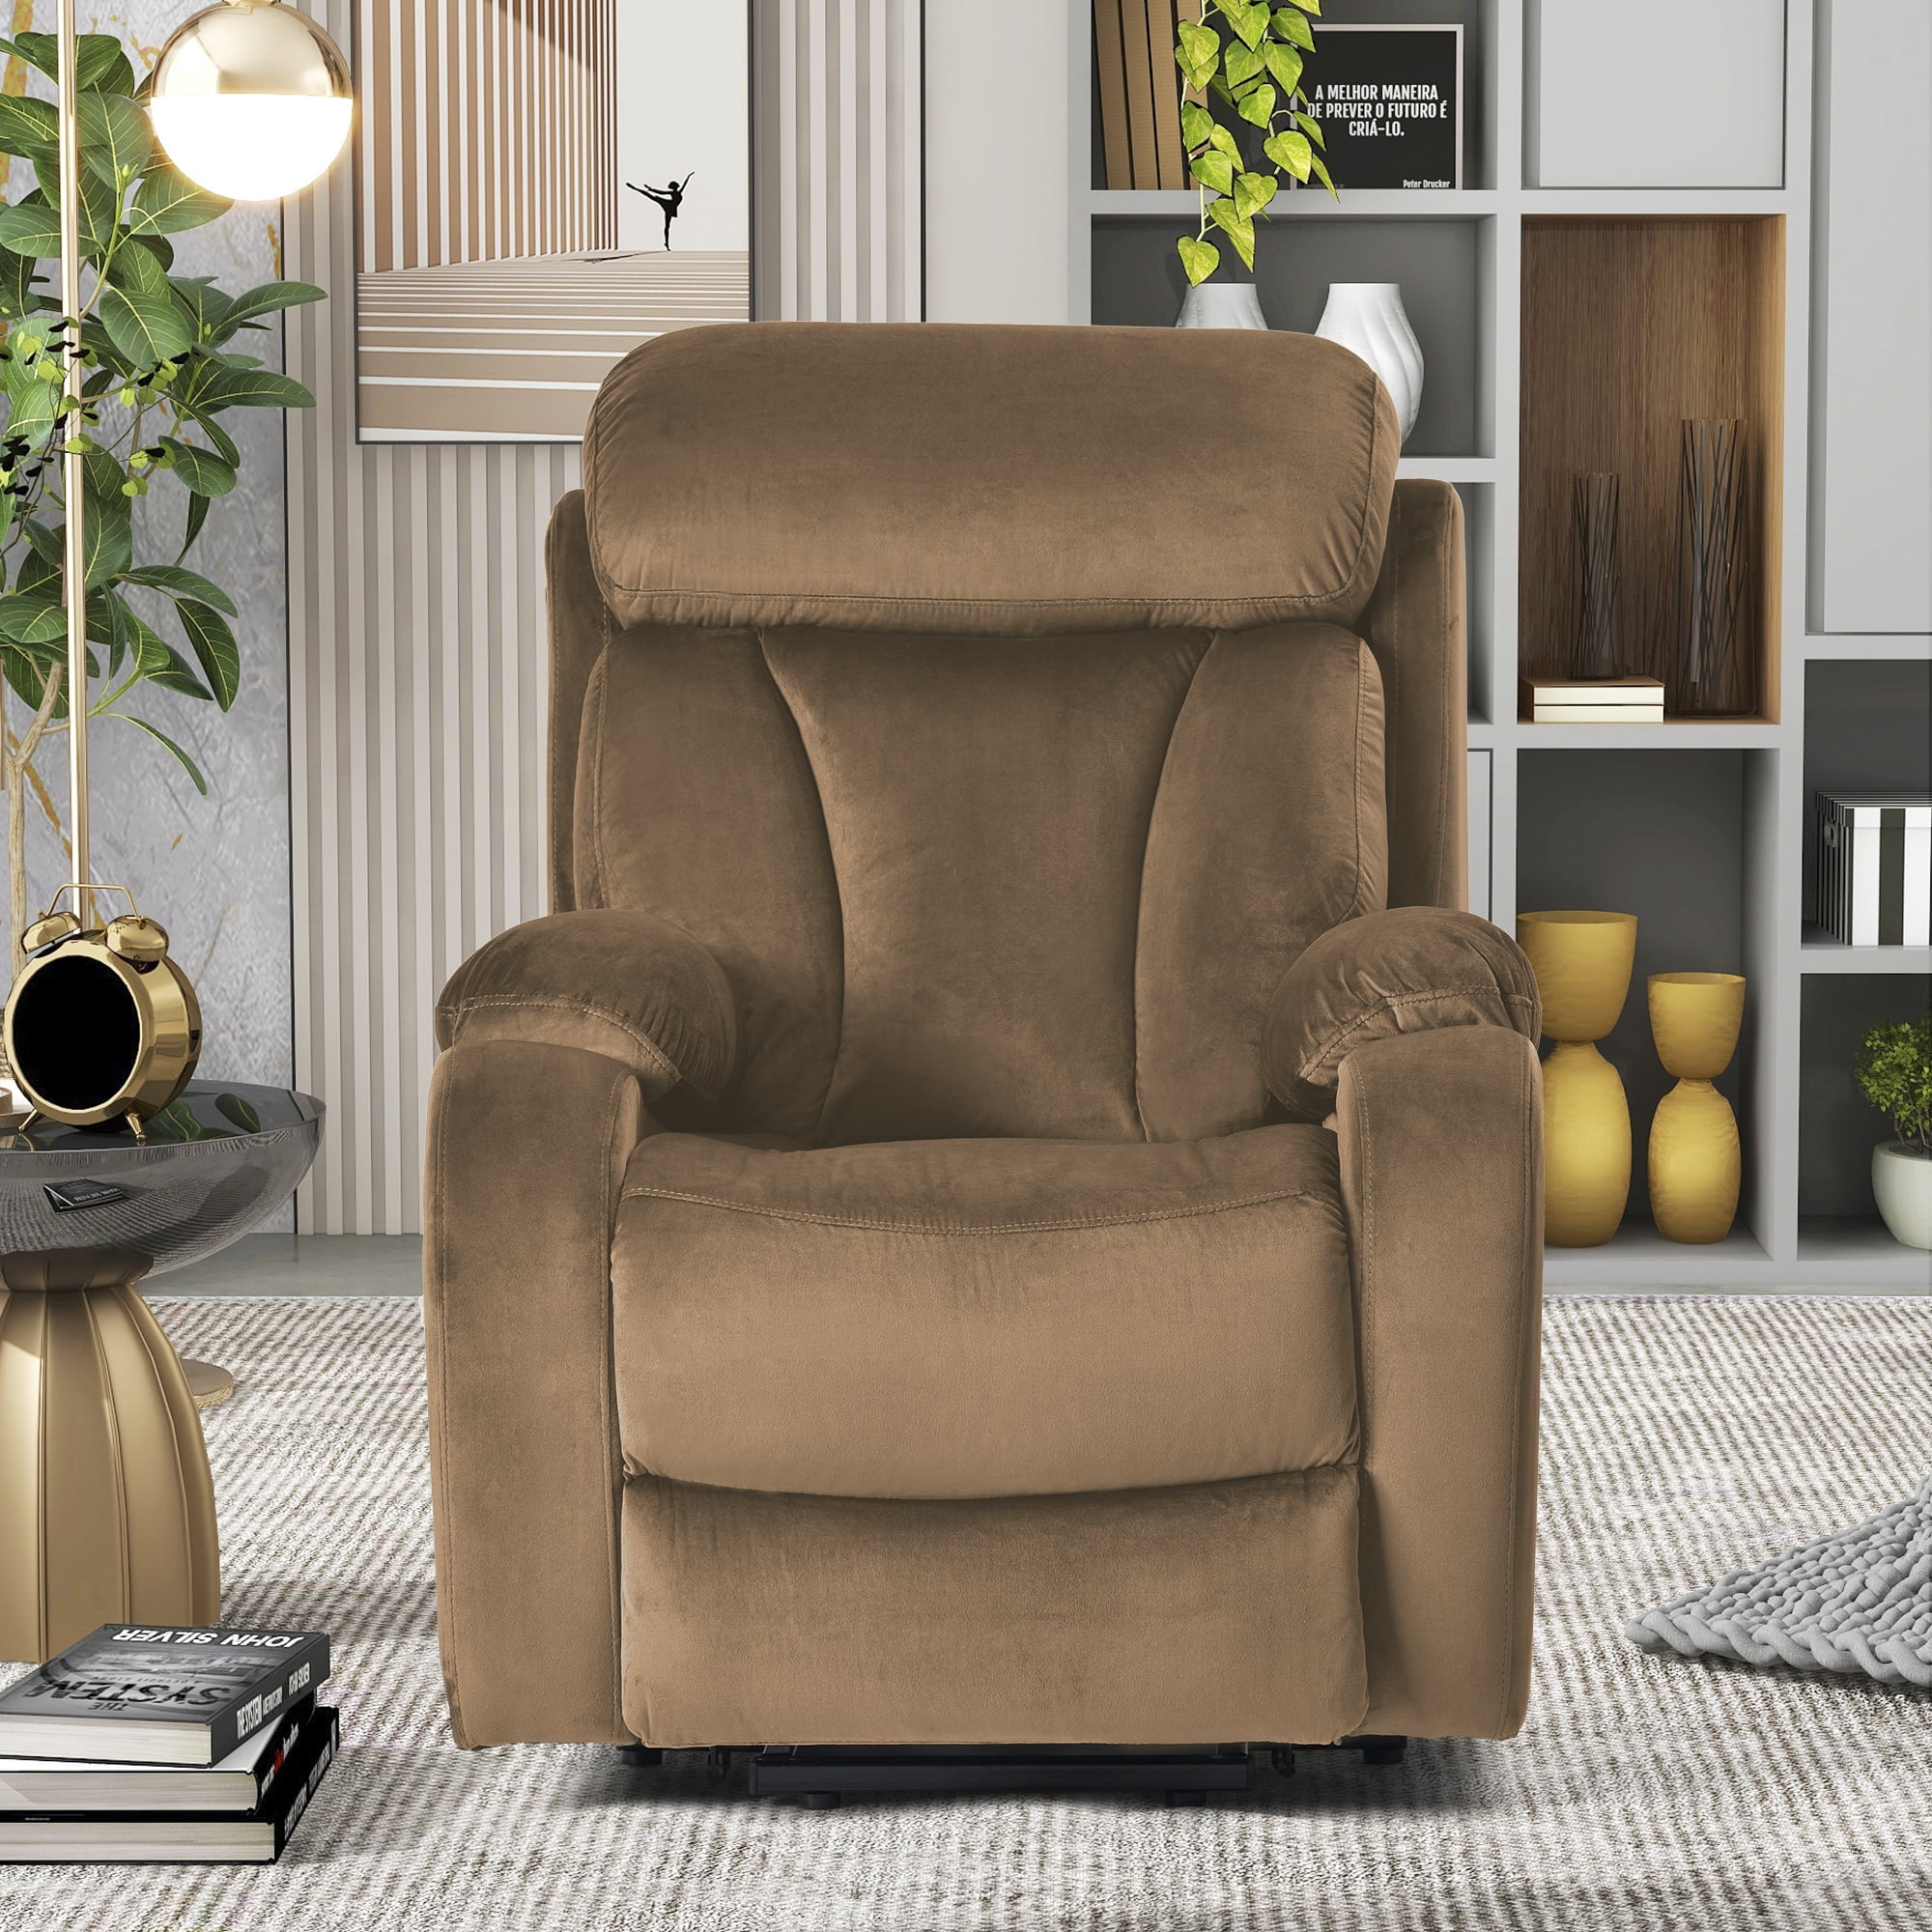 Dropship Lift Chair Recliner For Elderly Power Remote Control Recliner Sofa  Relax Soft Chair Anti-skid Australia Cashmere Fabric Furniture Living Room  Navy Blue to Sell Online at a Lower Price